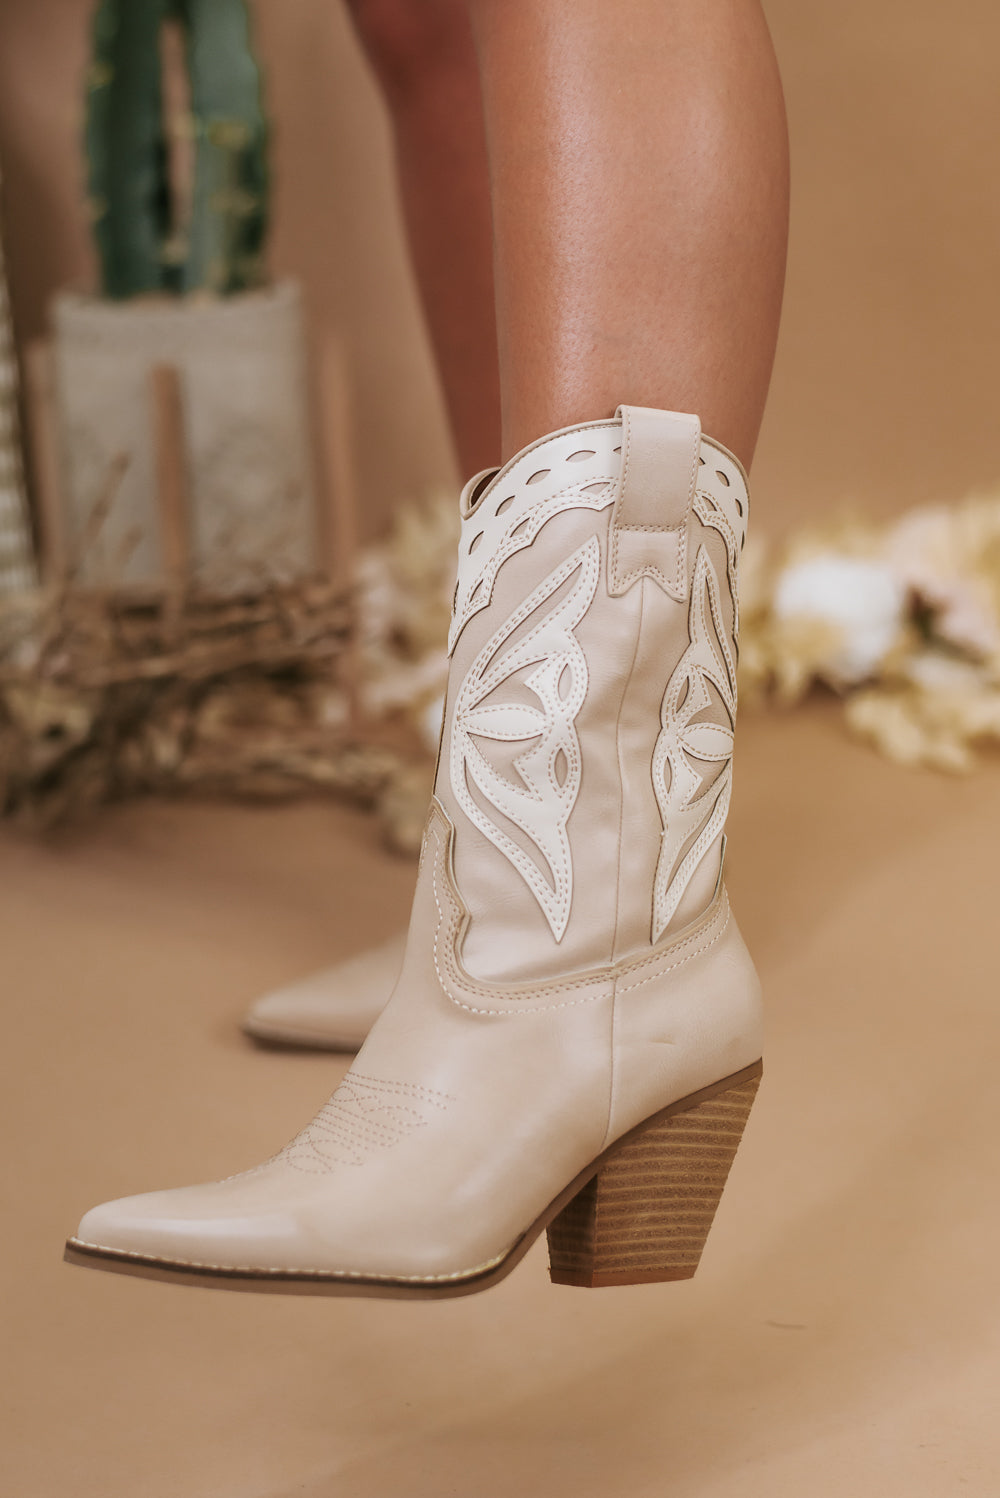 Subtle Cowgirl: How I Style Western Booties For Everyday - The Mom